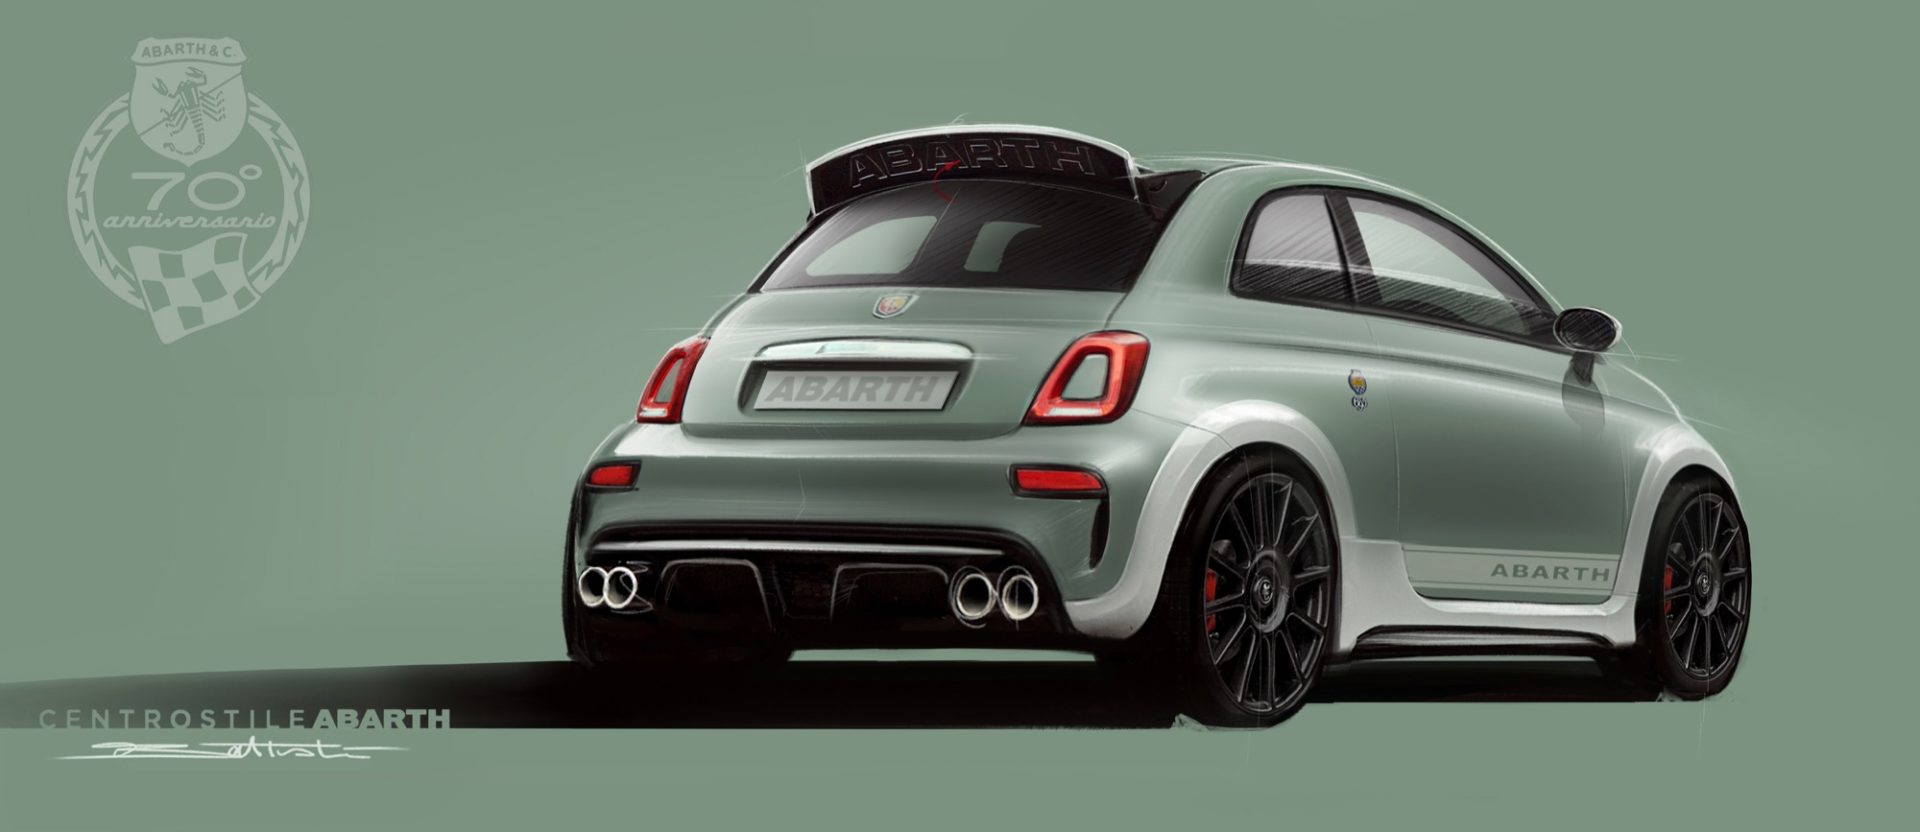 Spoiler made in Abarth